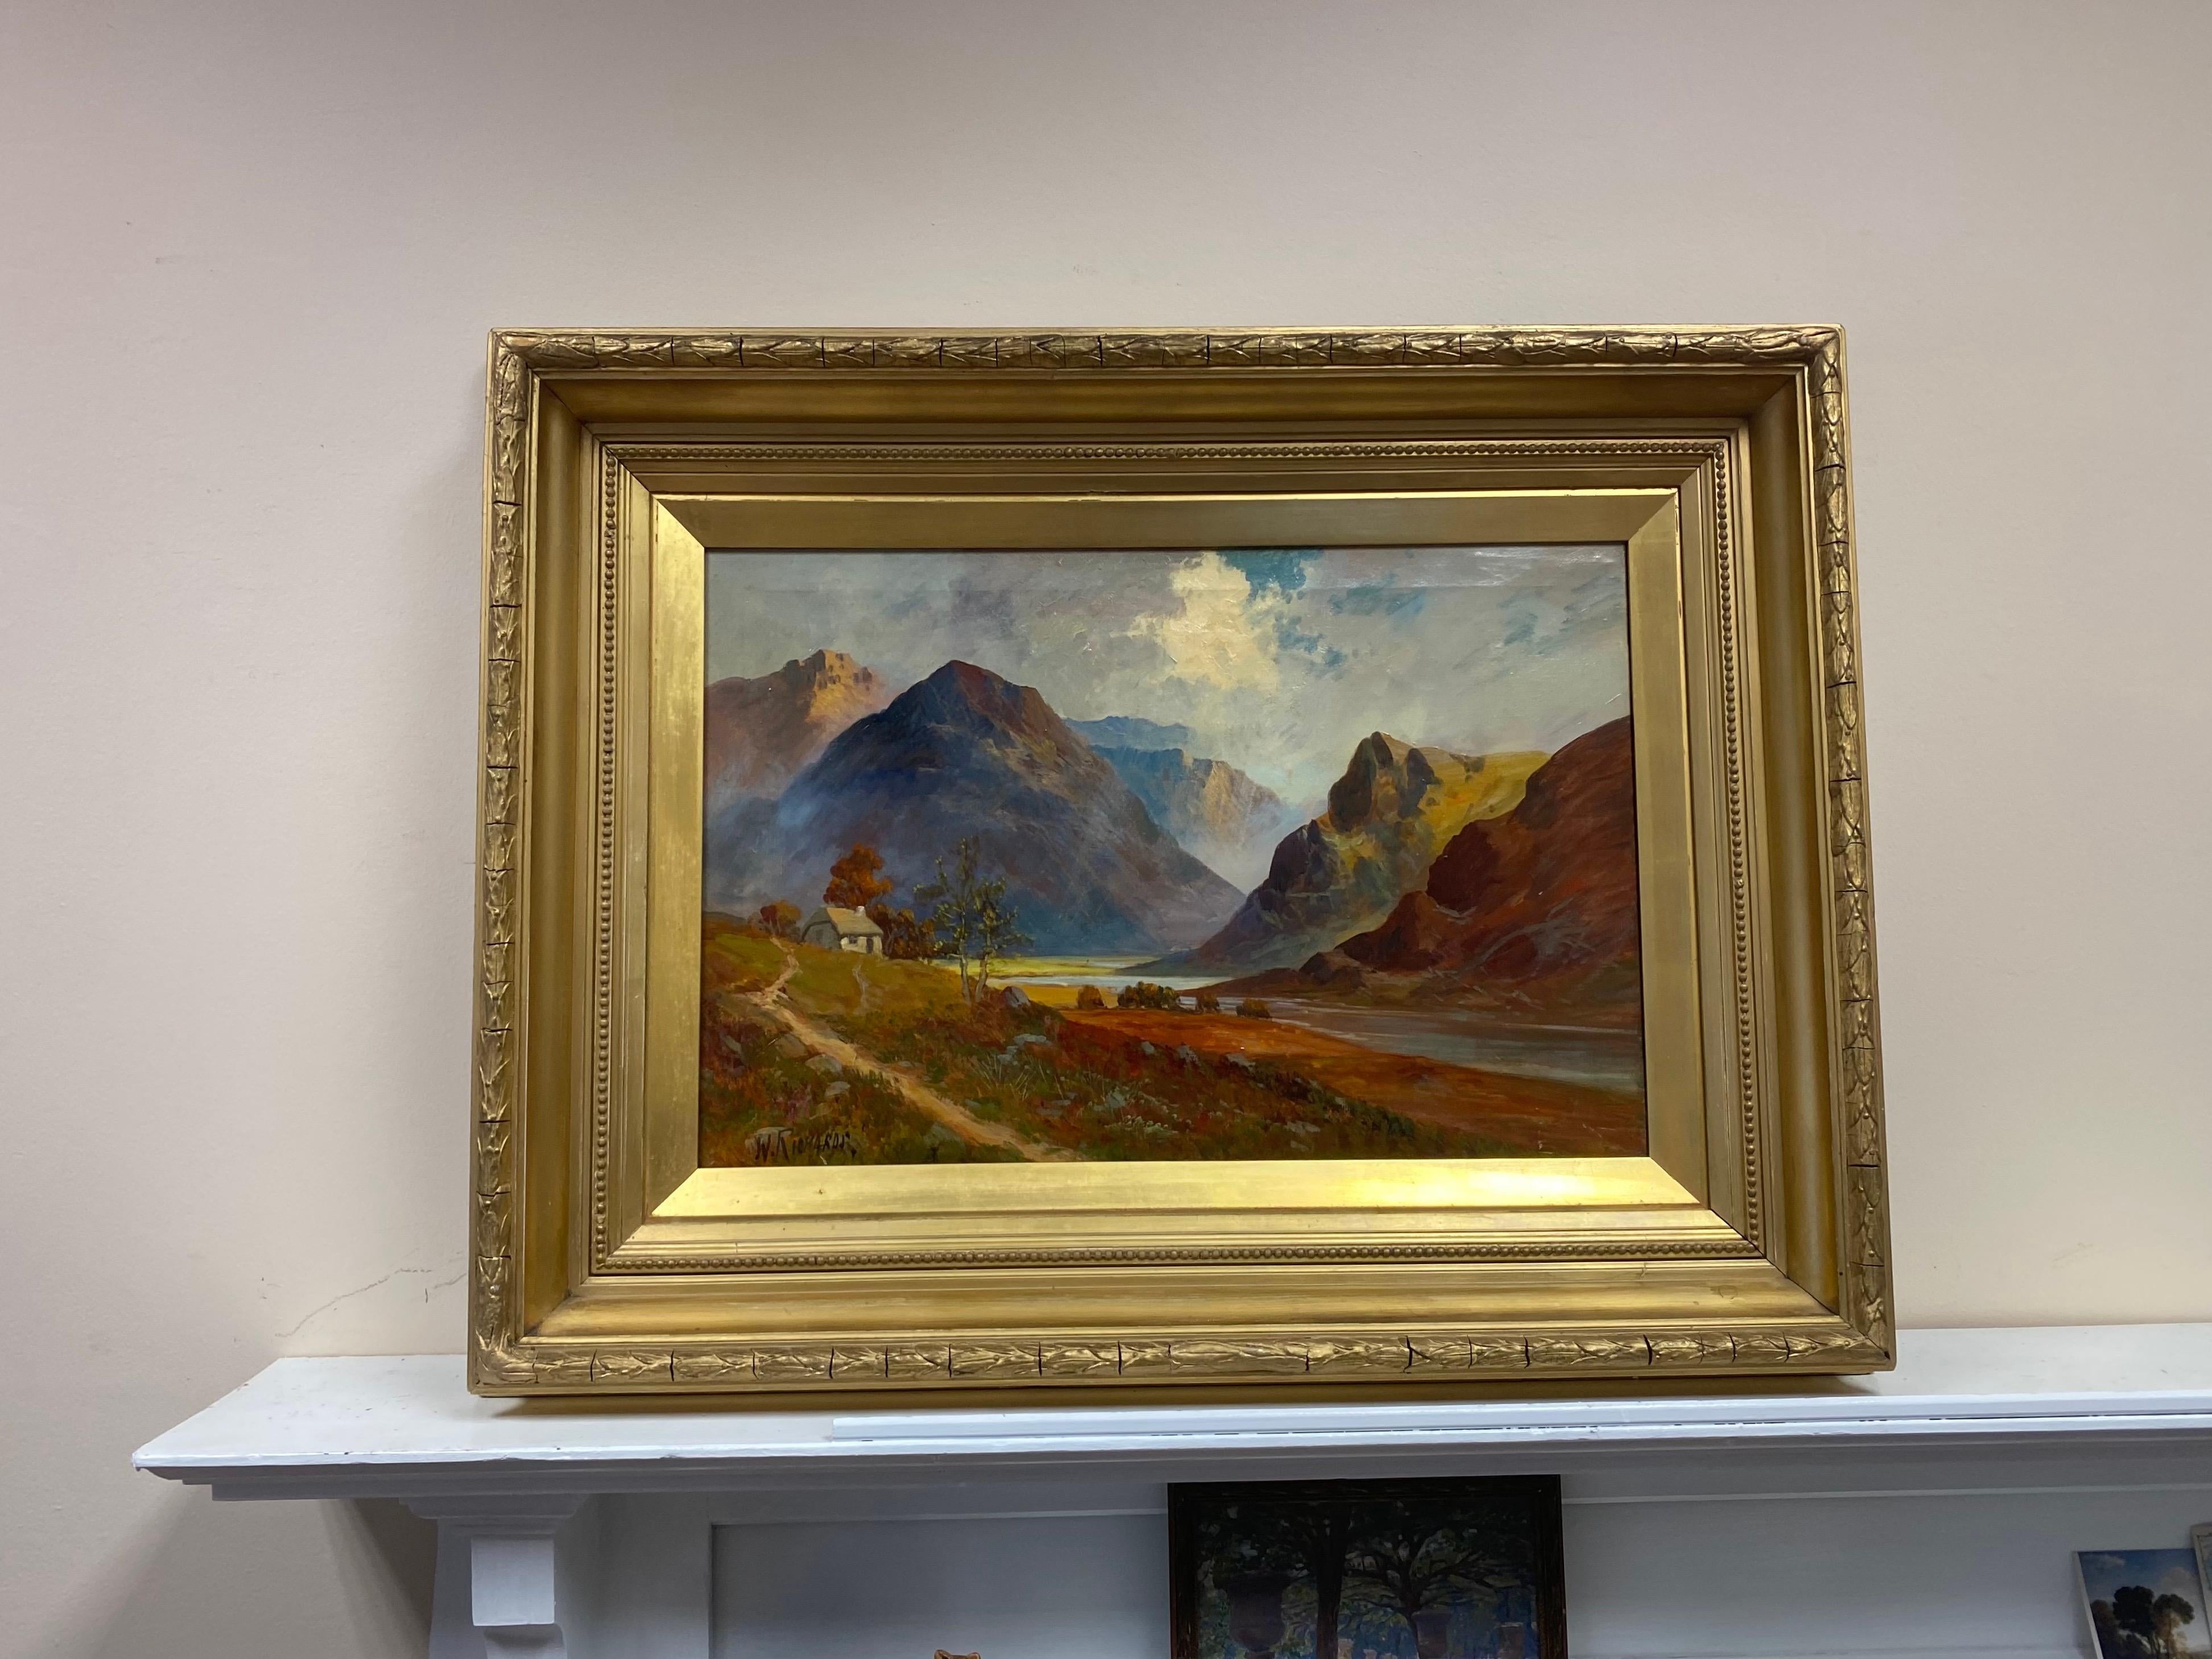 Large Antique Scottish Highlands Oil Painting in Gilt Frame Pitlochry Perthshire - Brown Landscape Painting by Francis E. Jamieson